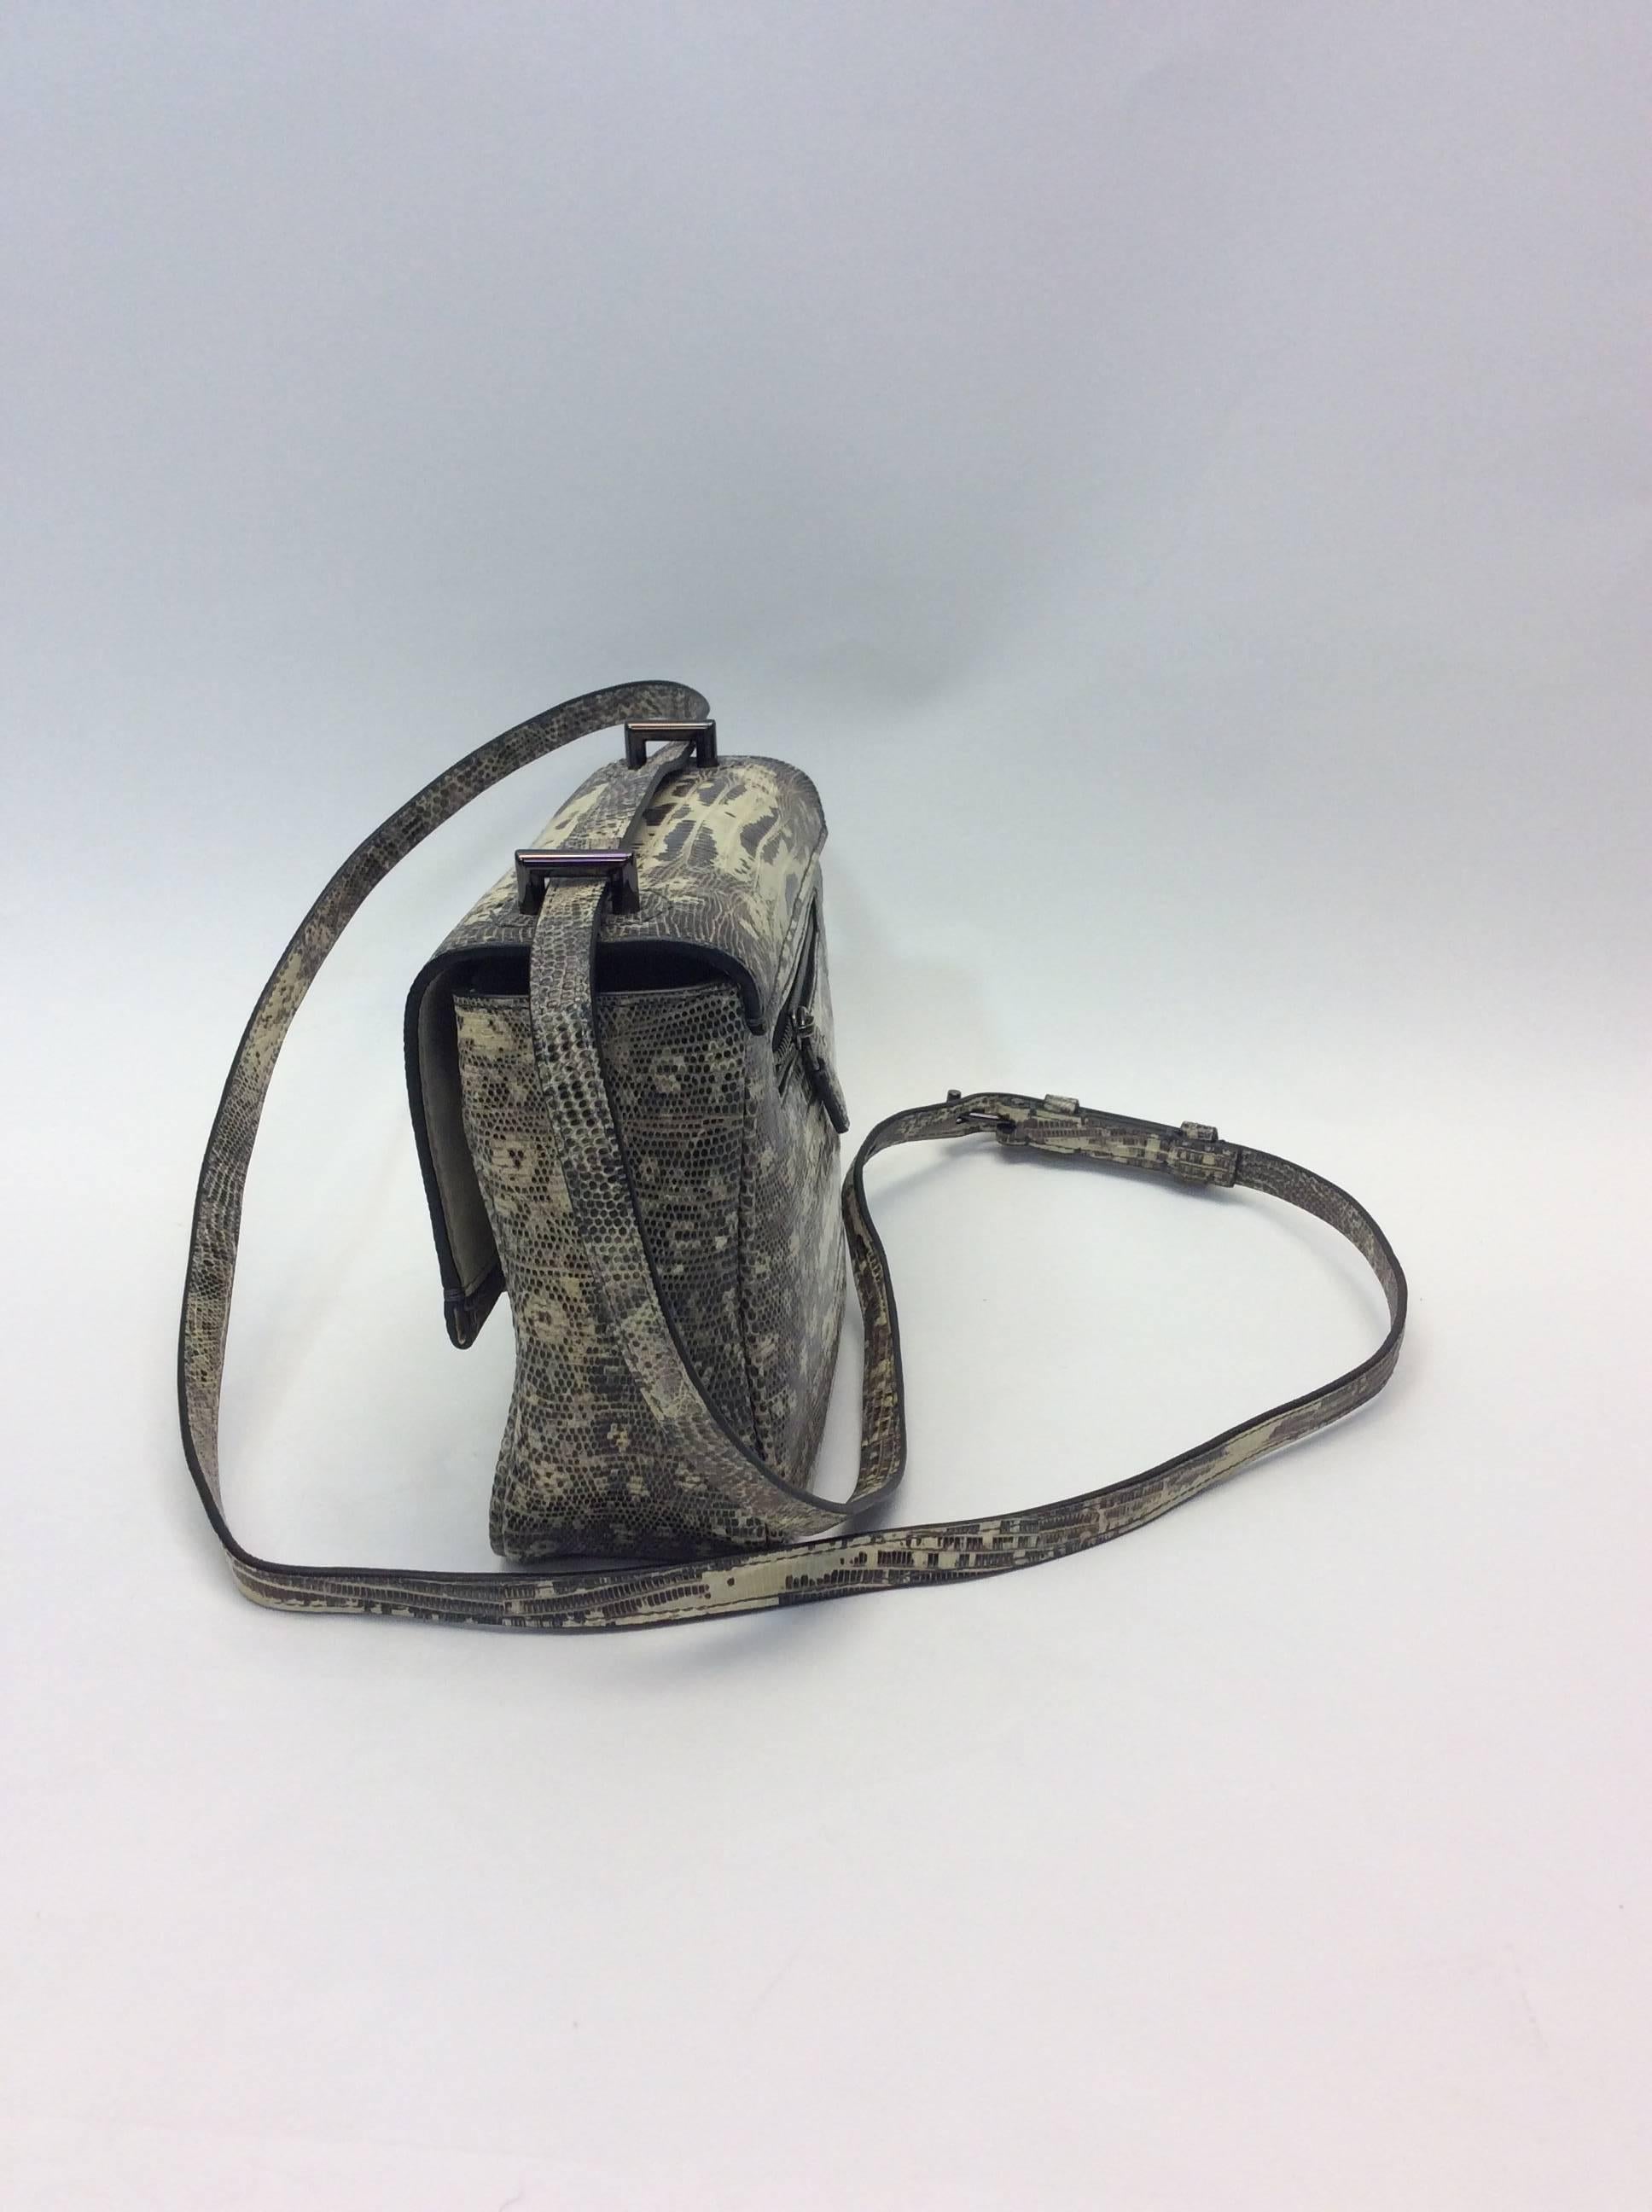 Reed Krakoff Mini Lizard Crossbody 
Style # 17267
Retail price: $2,490
Tejus lizard skin. Black nickel hardware
Convertible and adjustable shoulder strap
Internal zipper pocket & interior fully lined with twill fabric
Origin unknown
$1,100